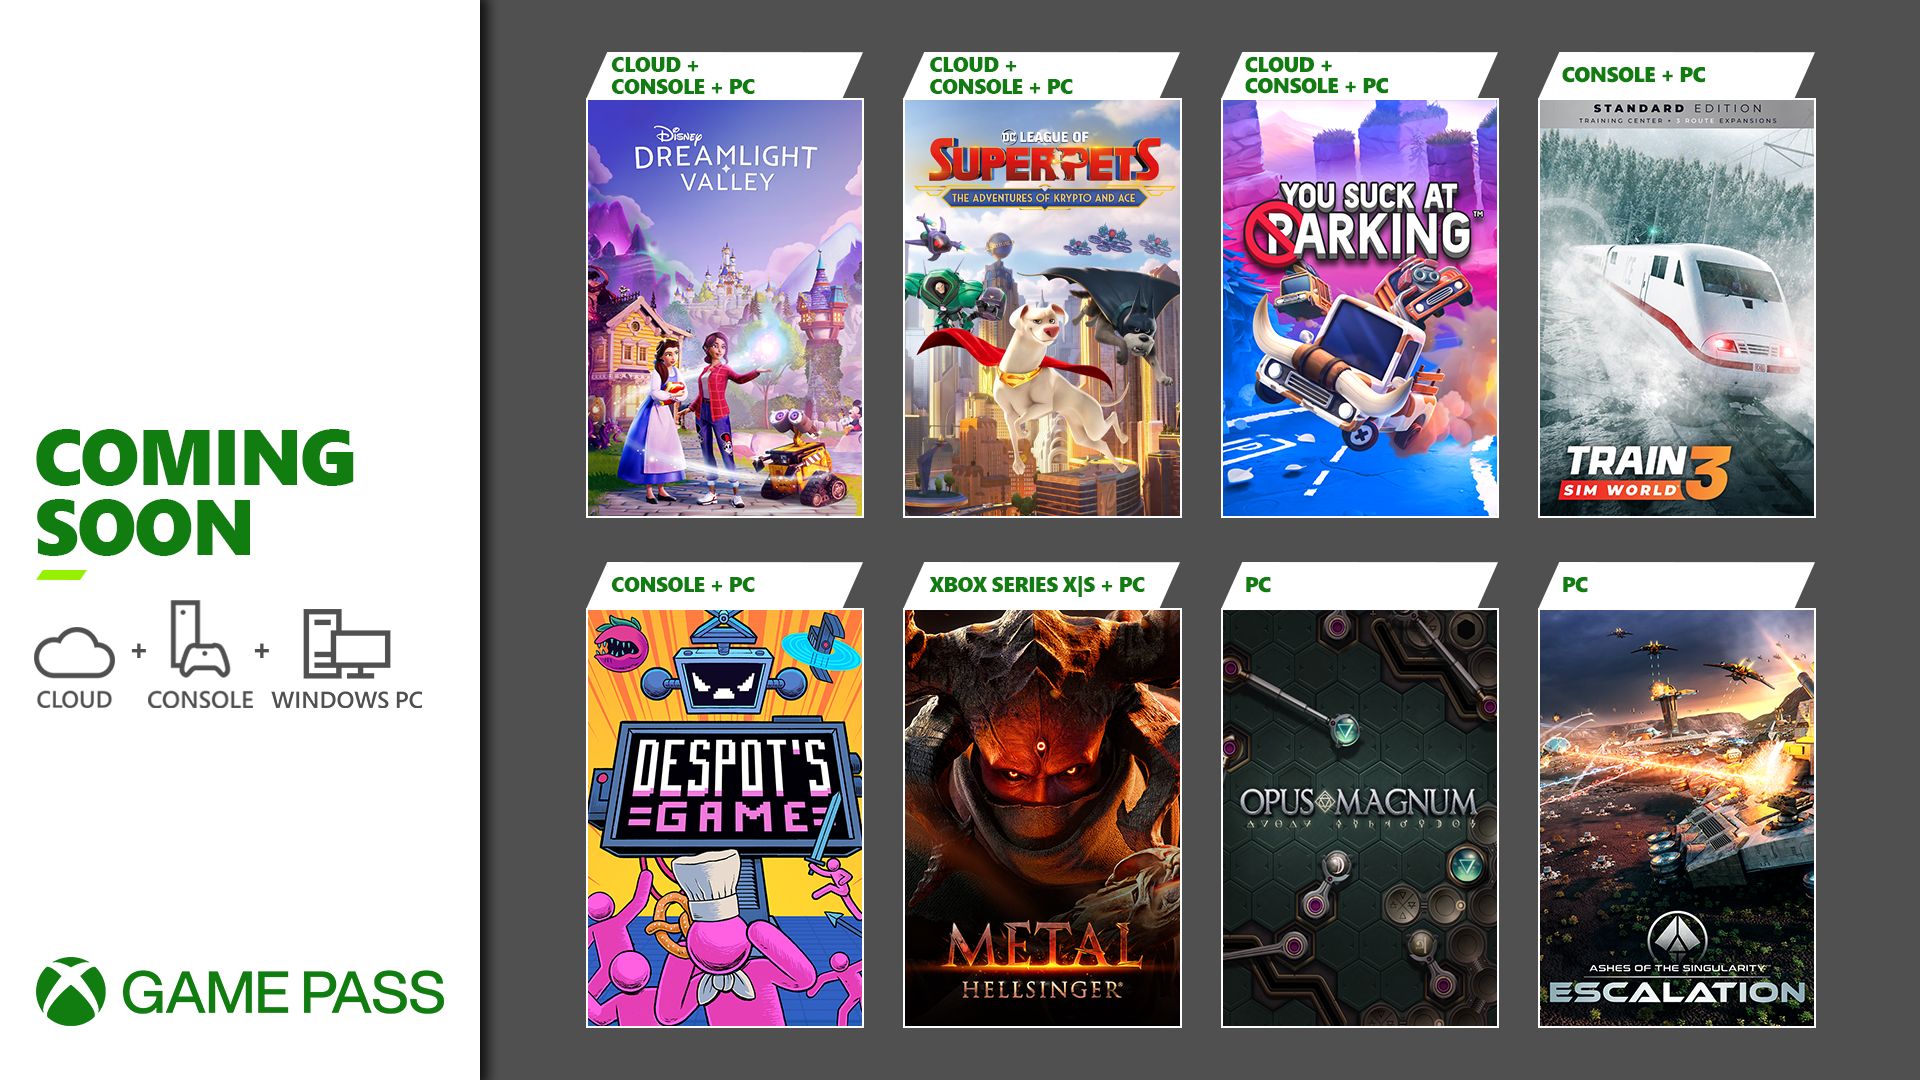 Mission Hej hej bandage Coming to Xbox Game Pass: Disney Dreamlight Valley, You Suck at Parking,  Metal: Hellsinger, and More - Xbox Wire